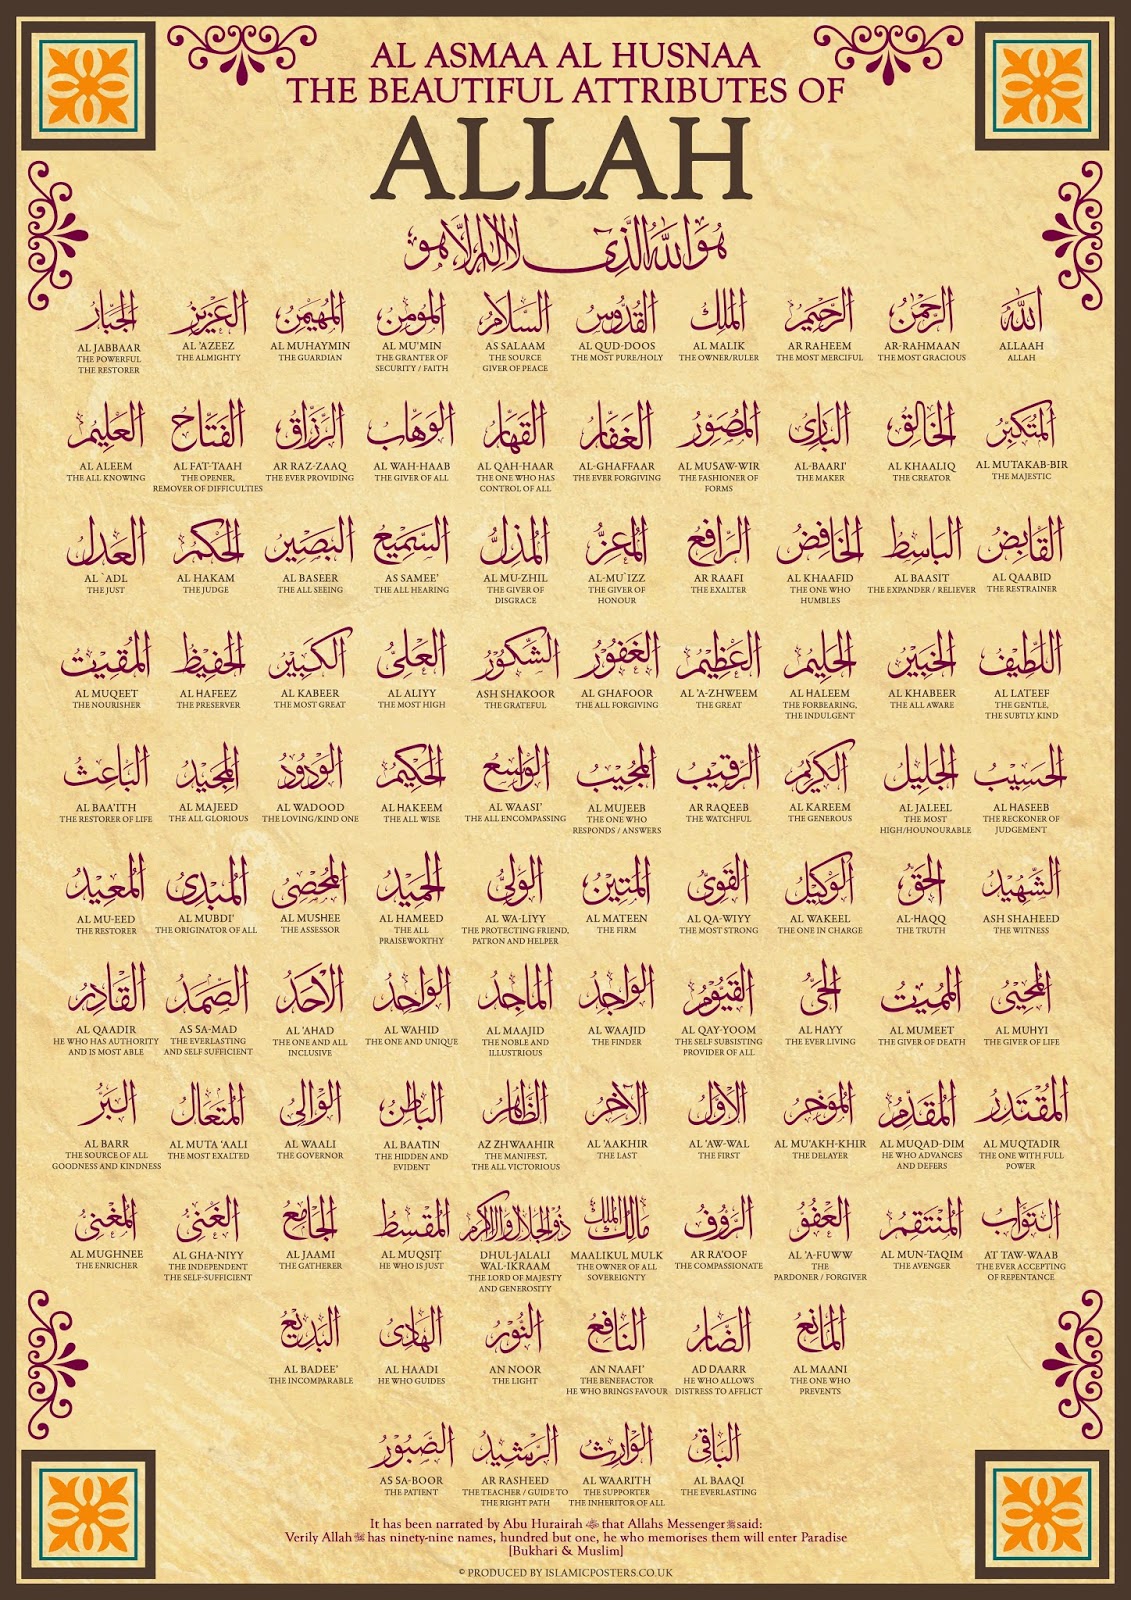 Know About Islam 99 names of Allah 